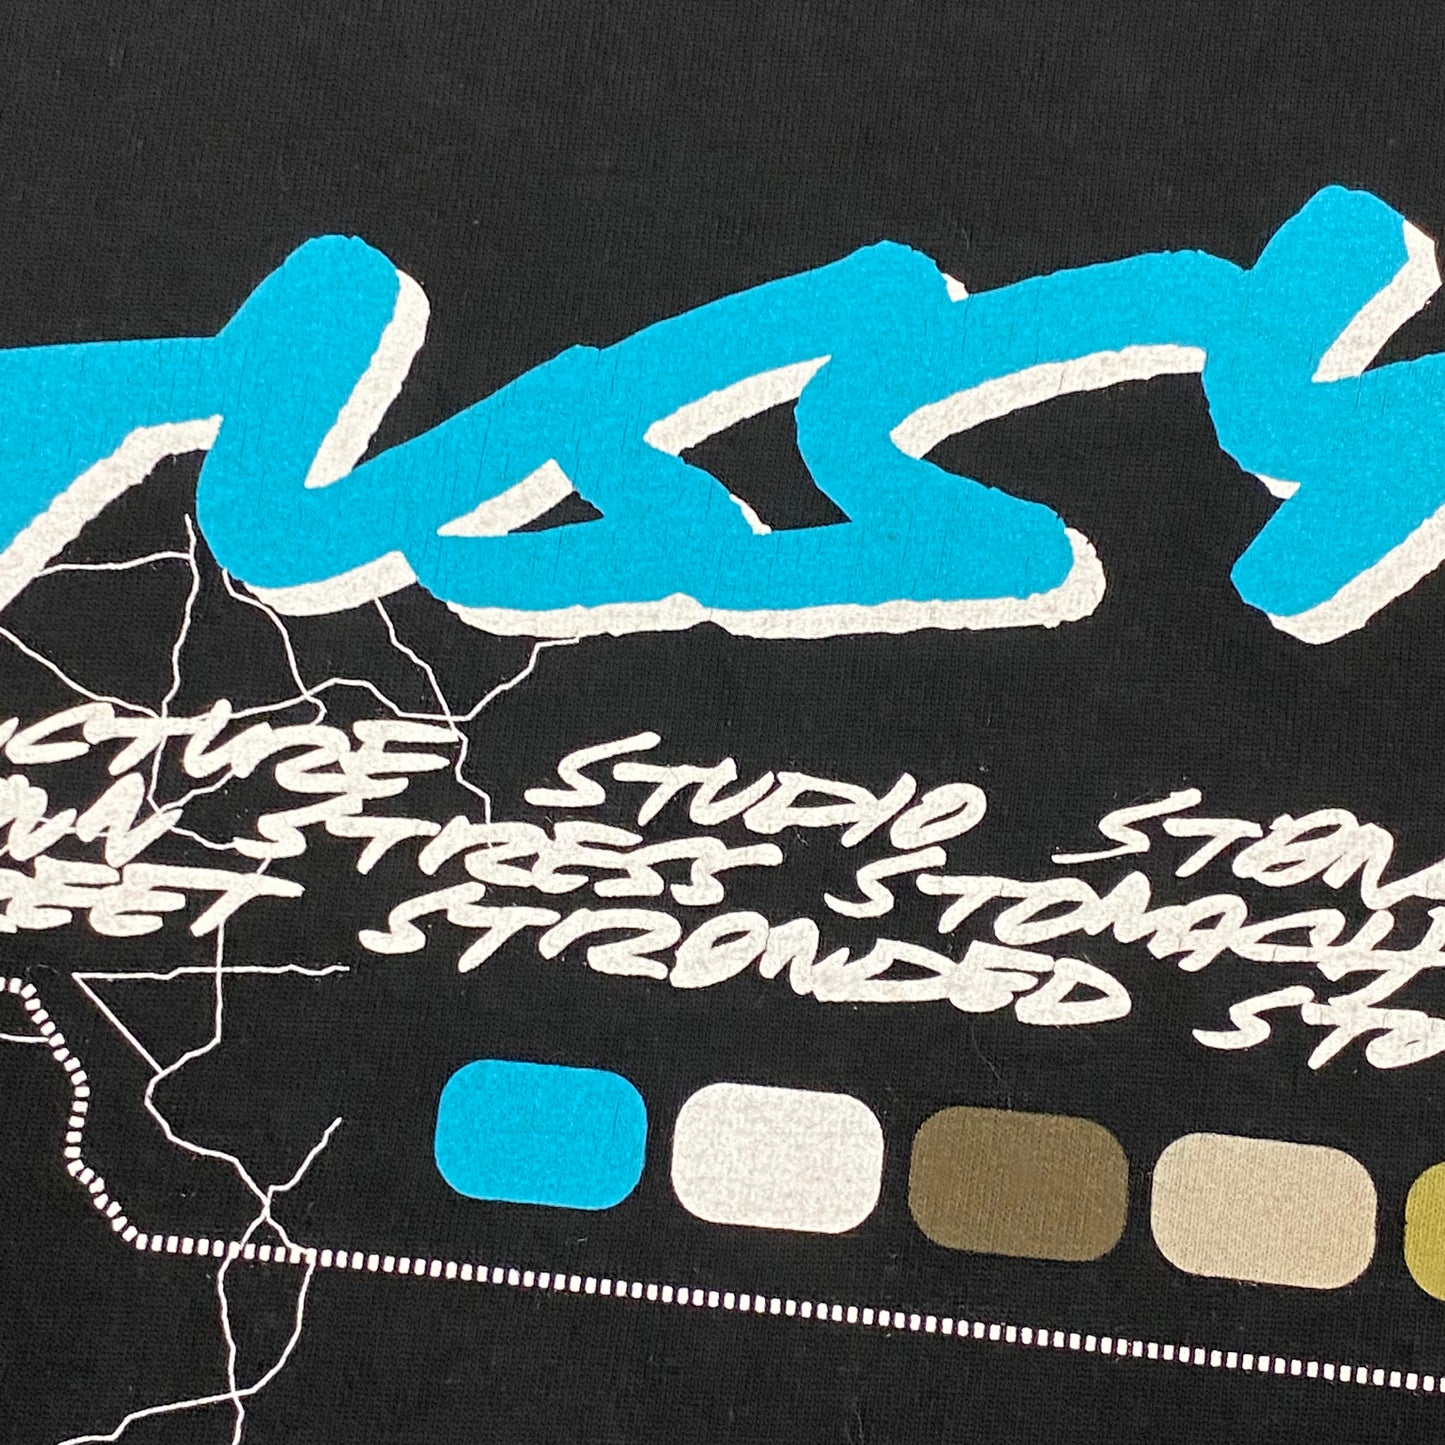 Stussy x Futura ‘08 Geographical Concepts LS - L